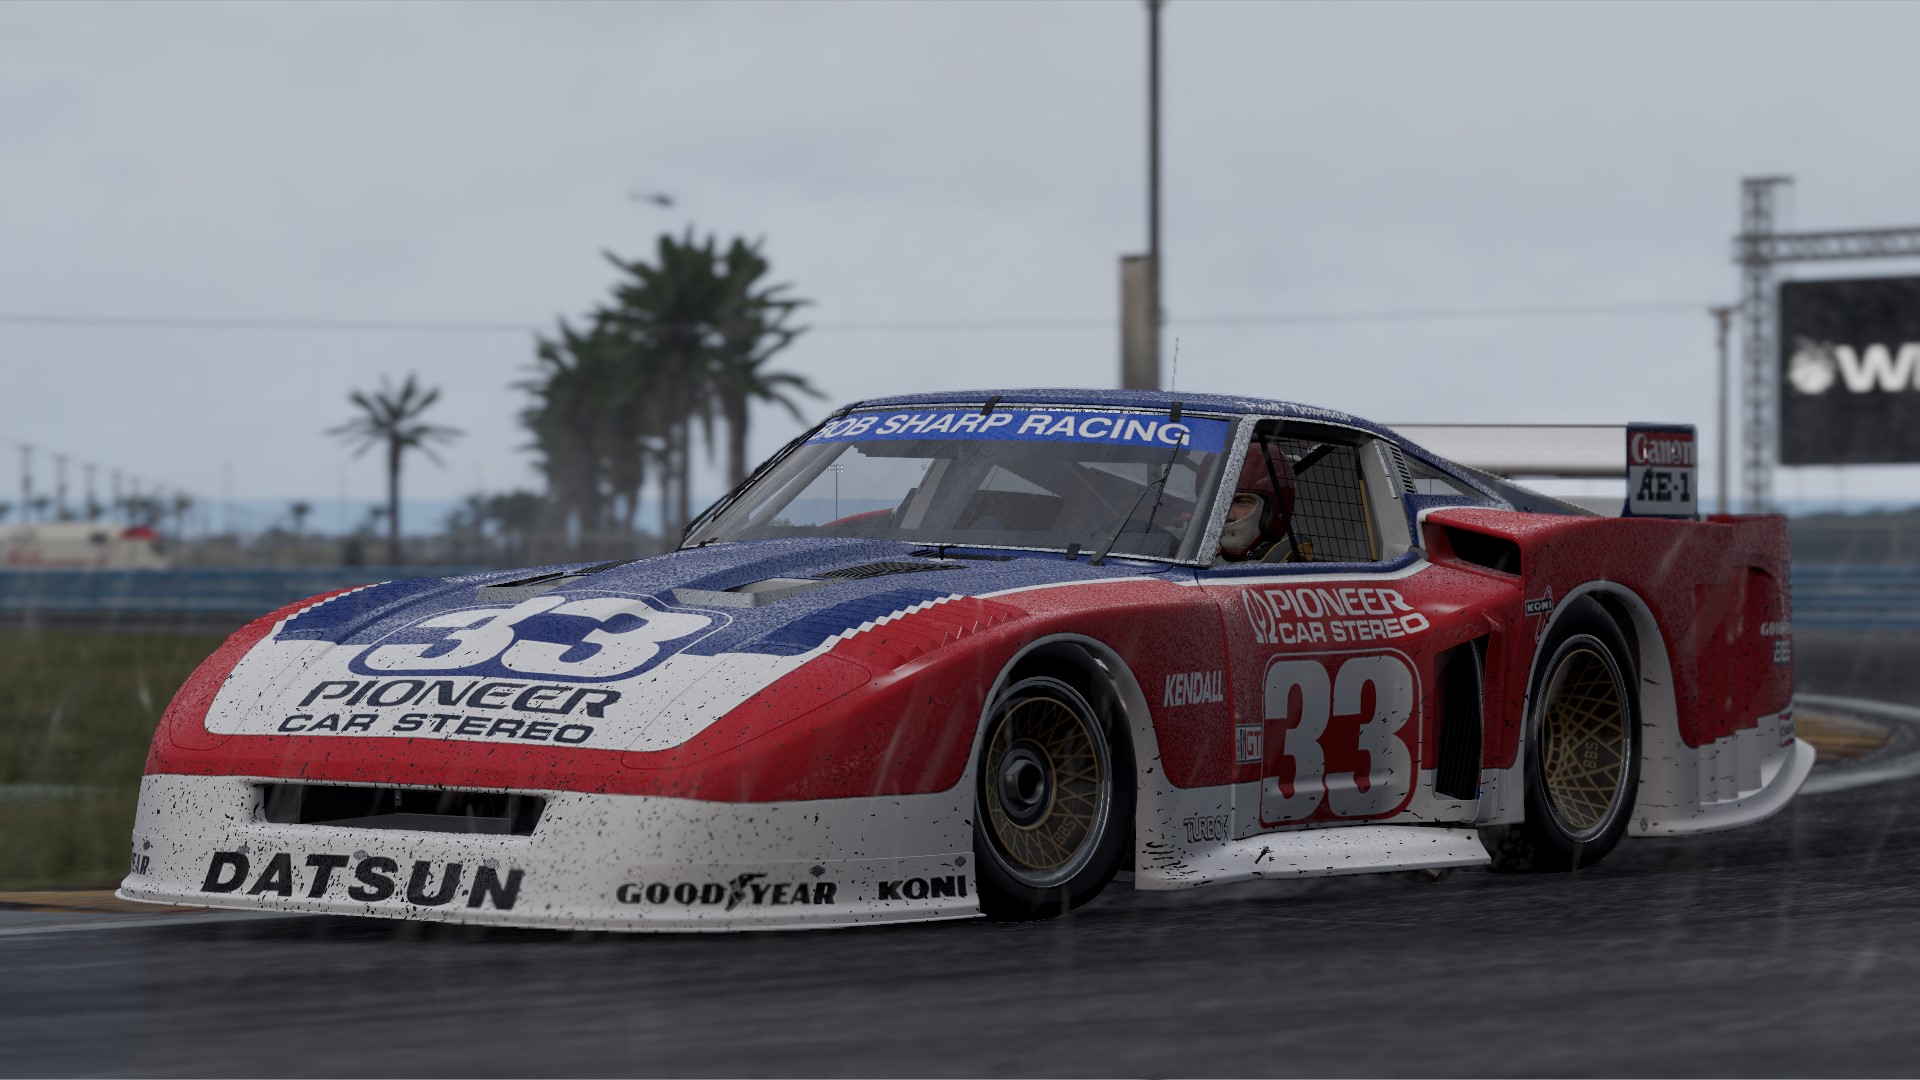 project cars 3 download free